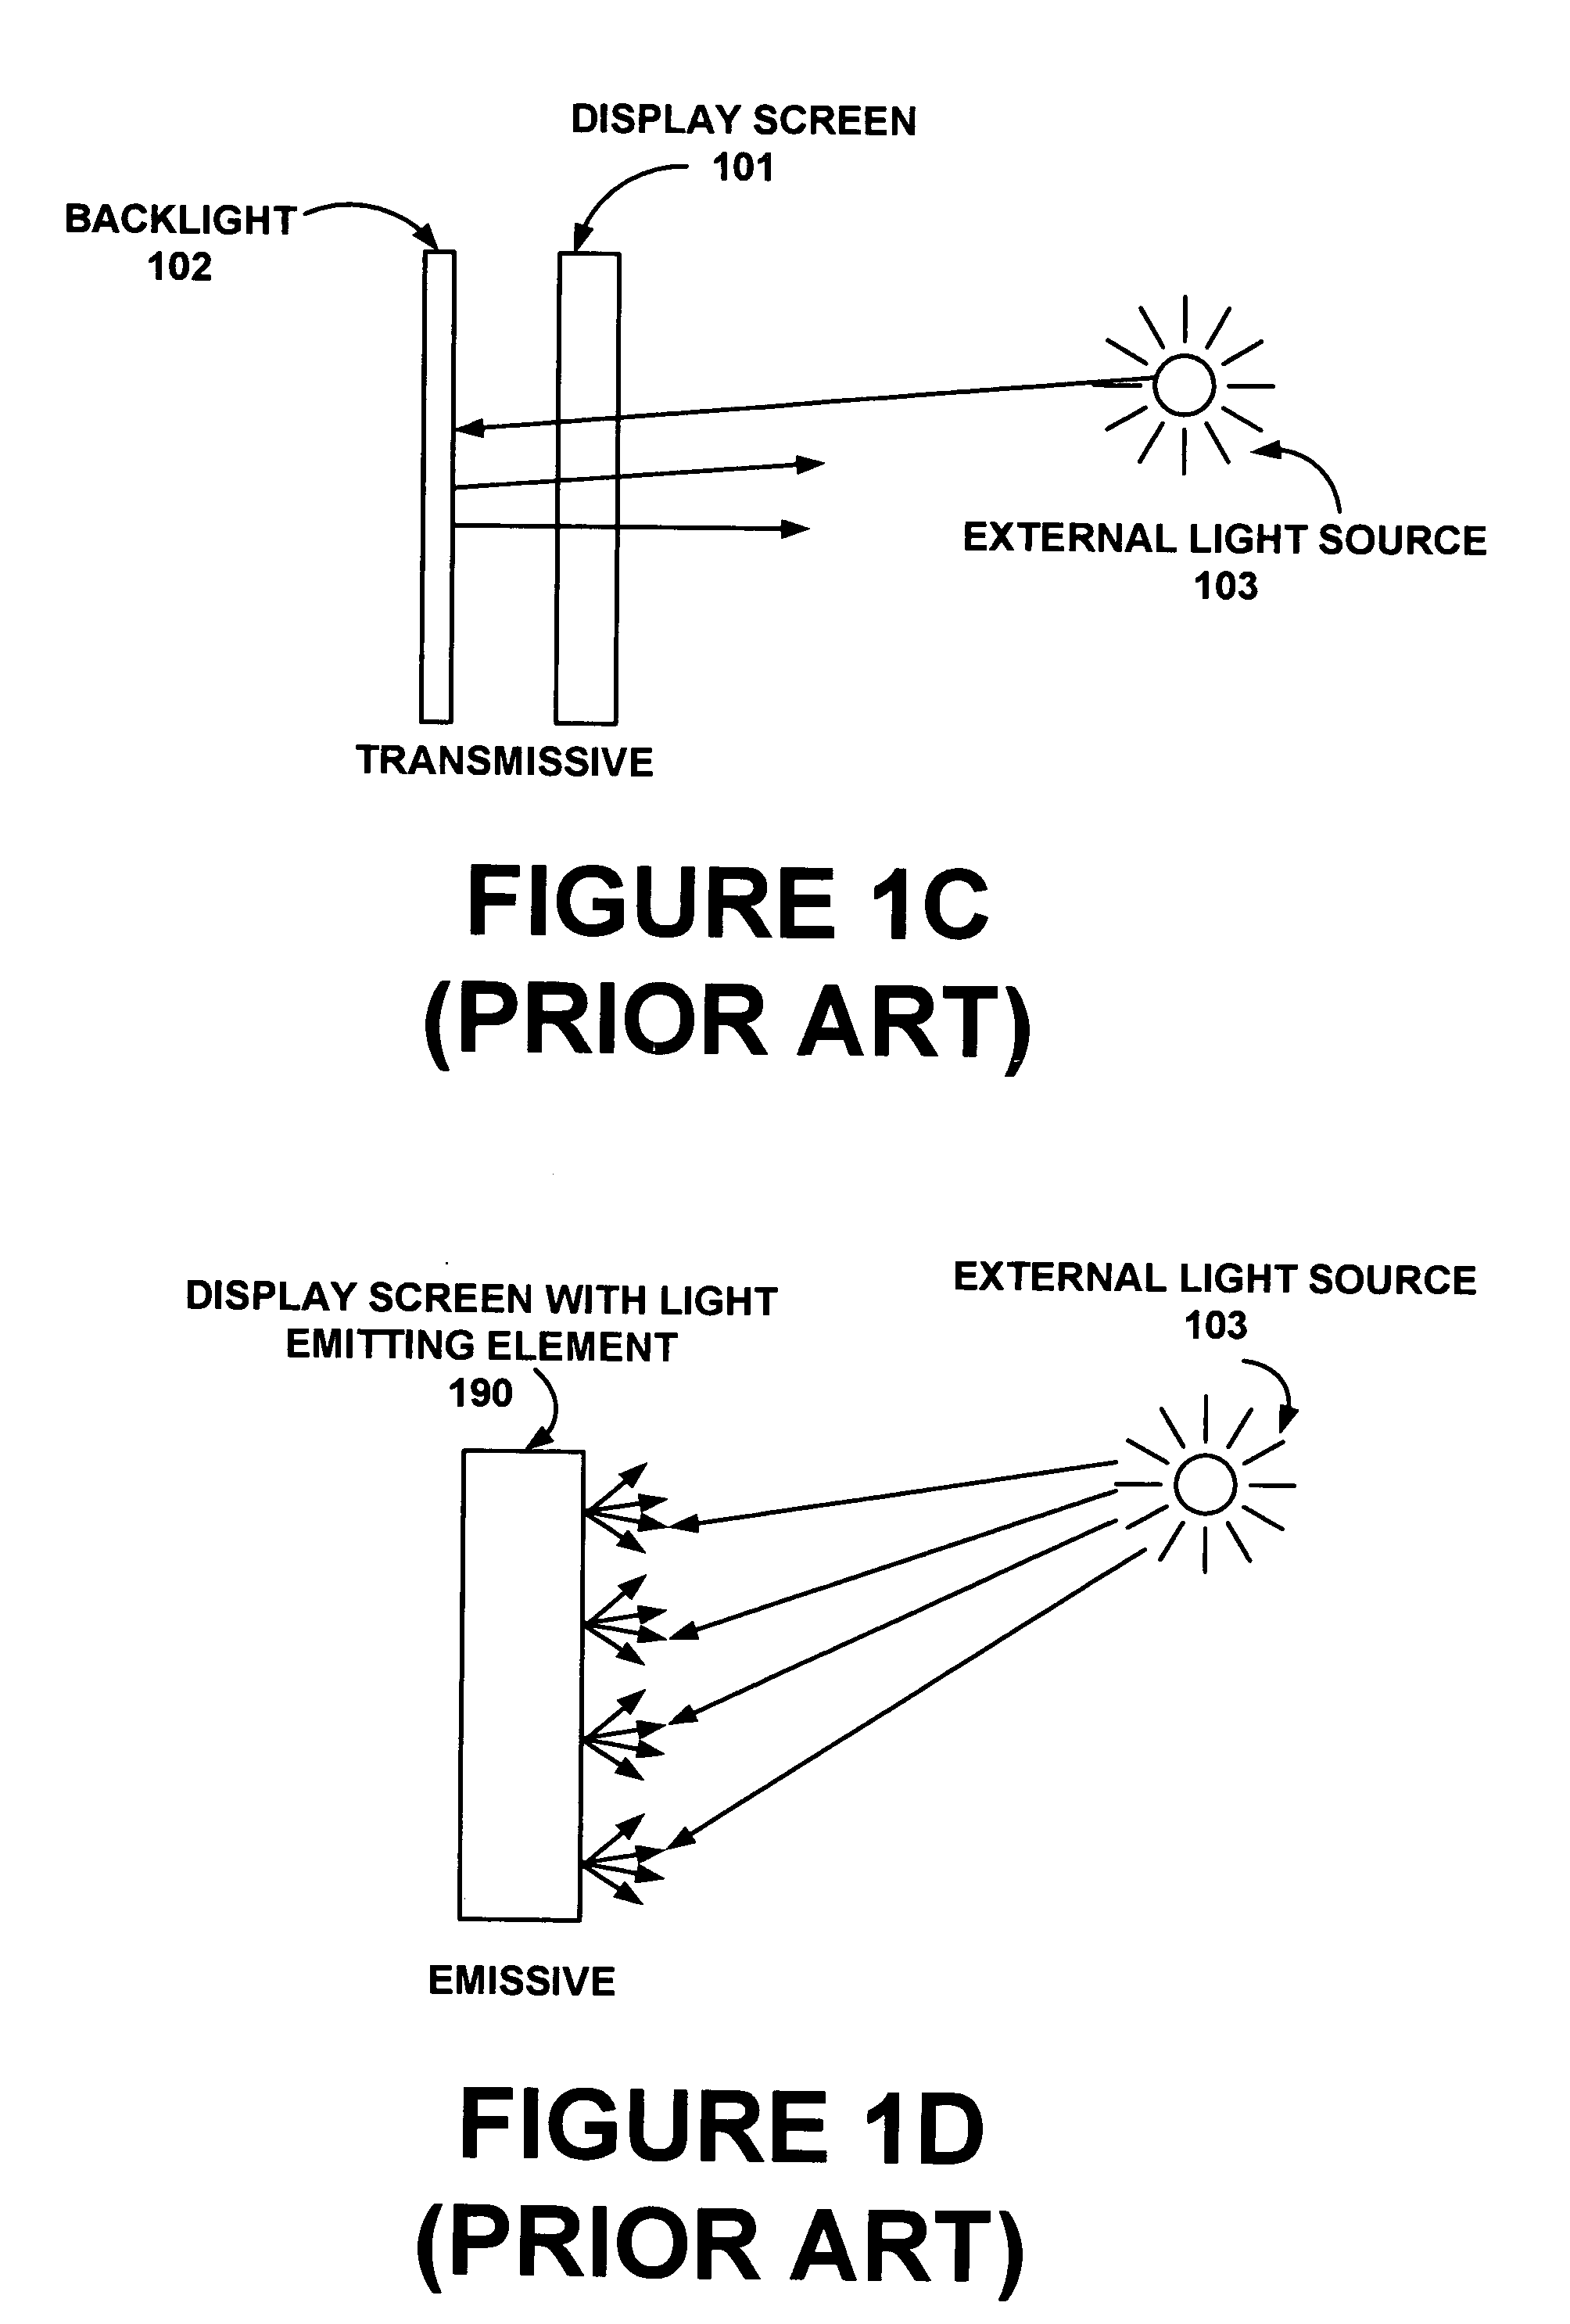 Dynamic brightness range for portable computer displays based on ambient conditions